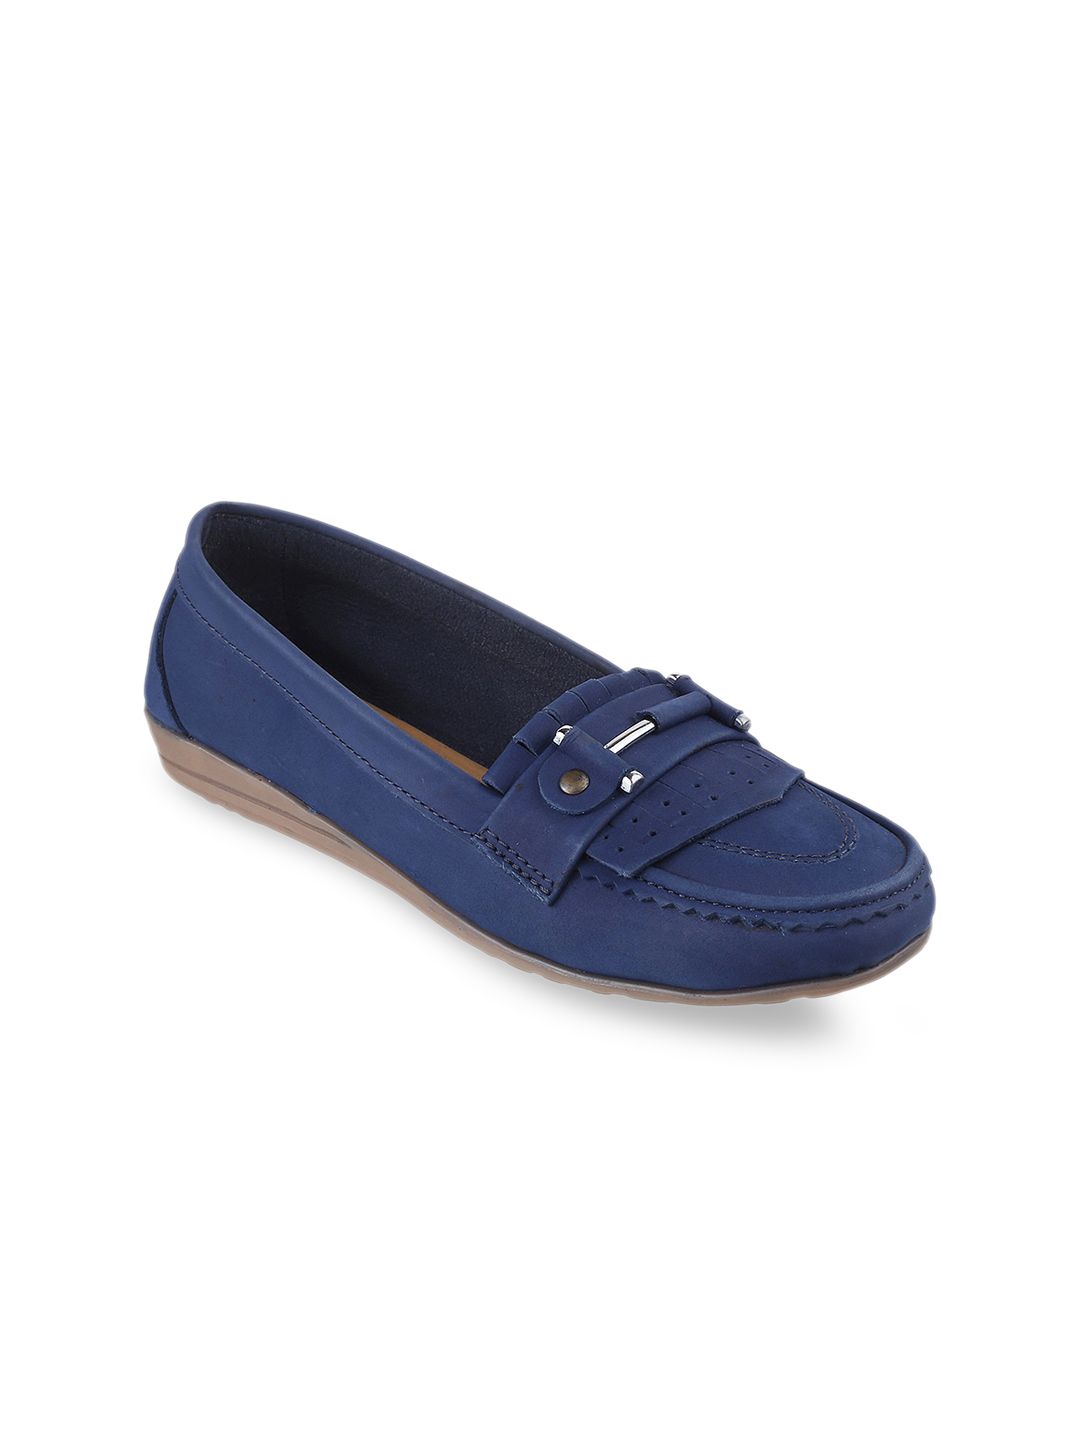 Catwalk Women Blue Leather Loafers Price in India